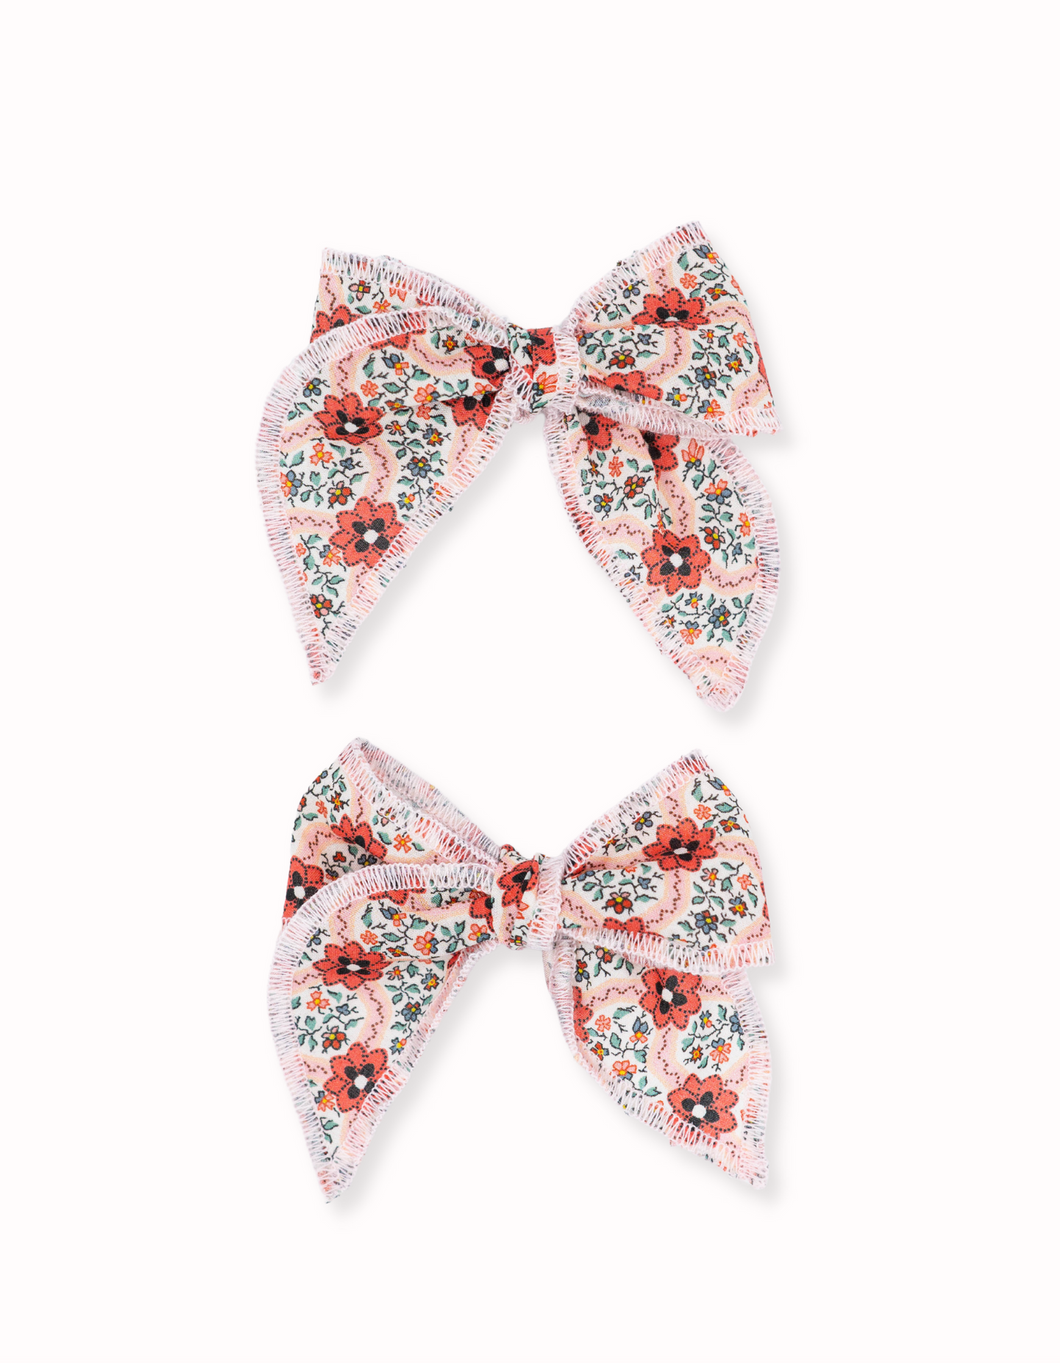 Angeli Mini Fable Bows in Liberty of London Fabric ( 2 piece sets )